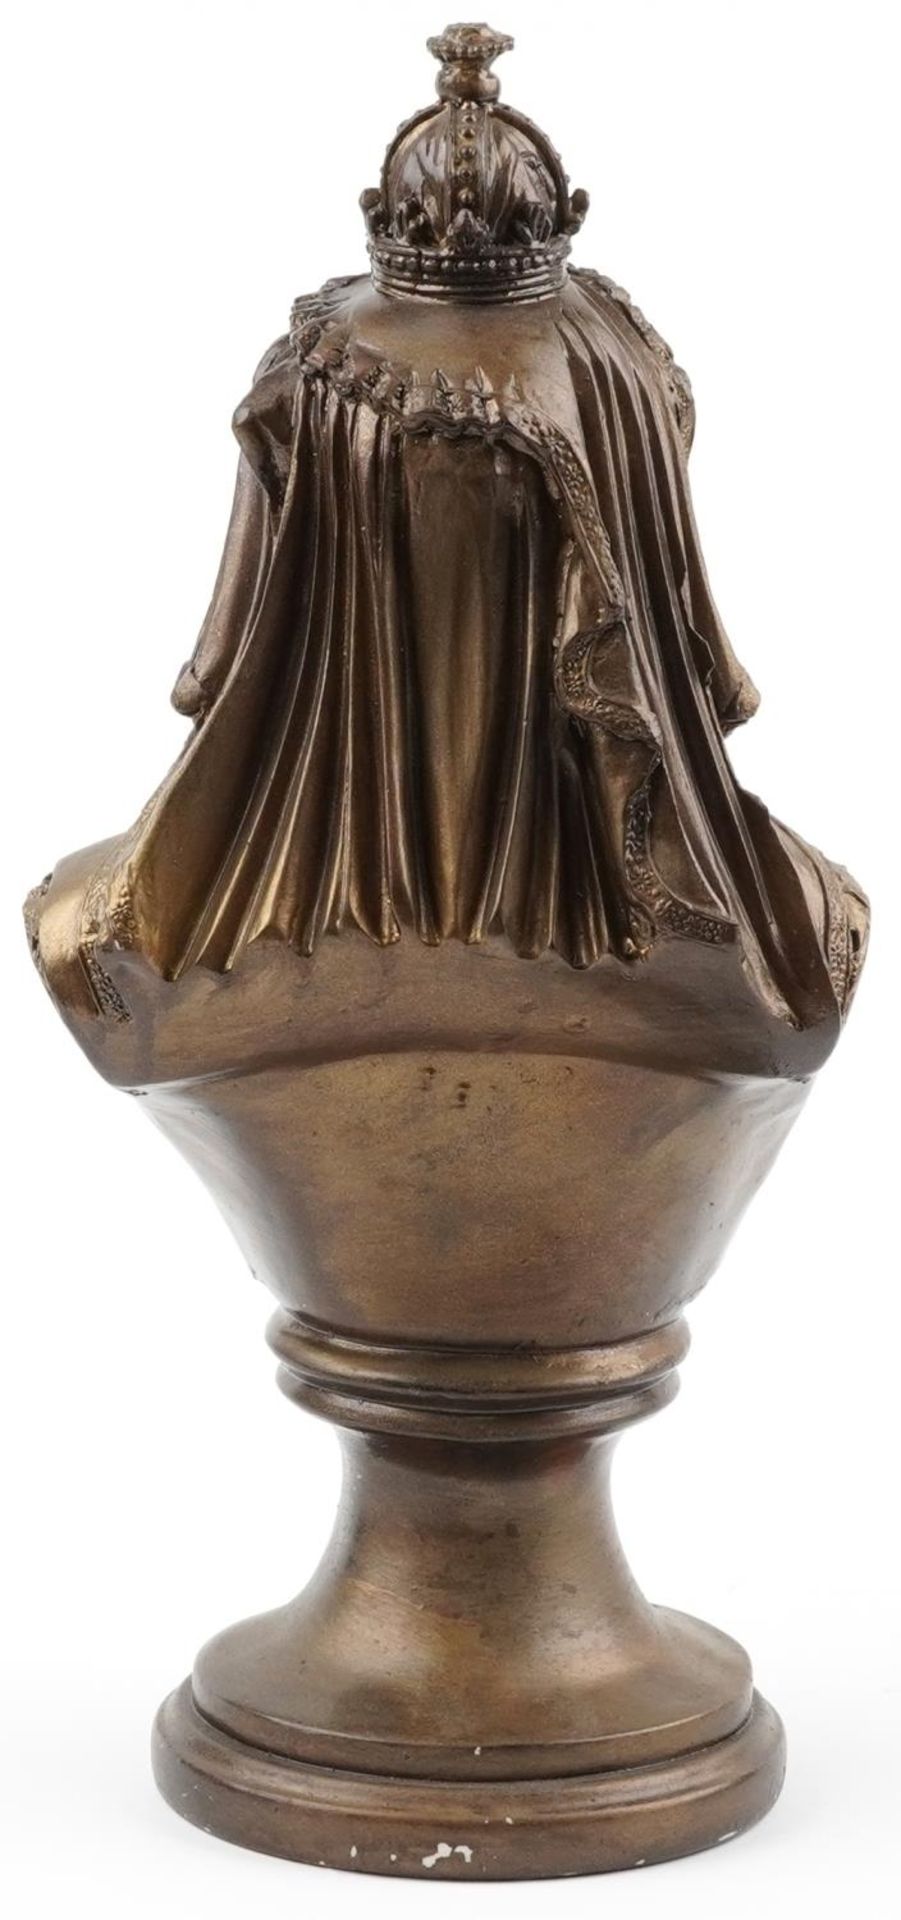 19th century style classical bronzed bust of Queen Victoria, 38.5cm high - Image 3 of 4